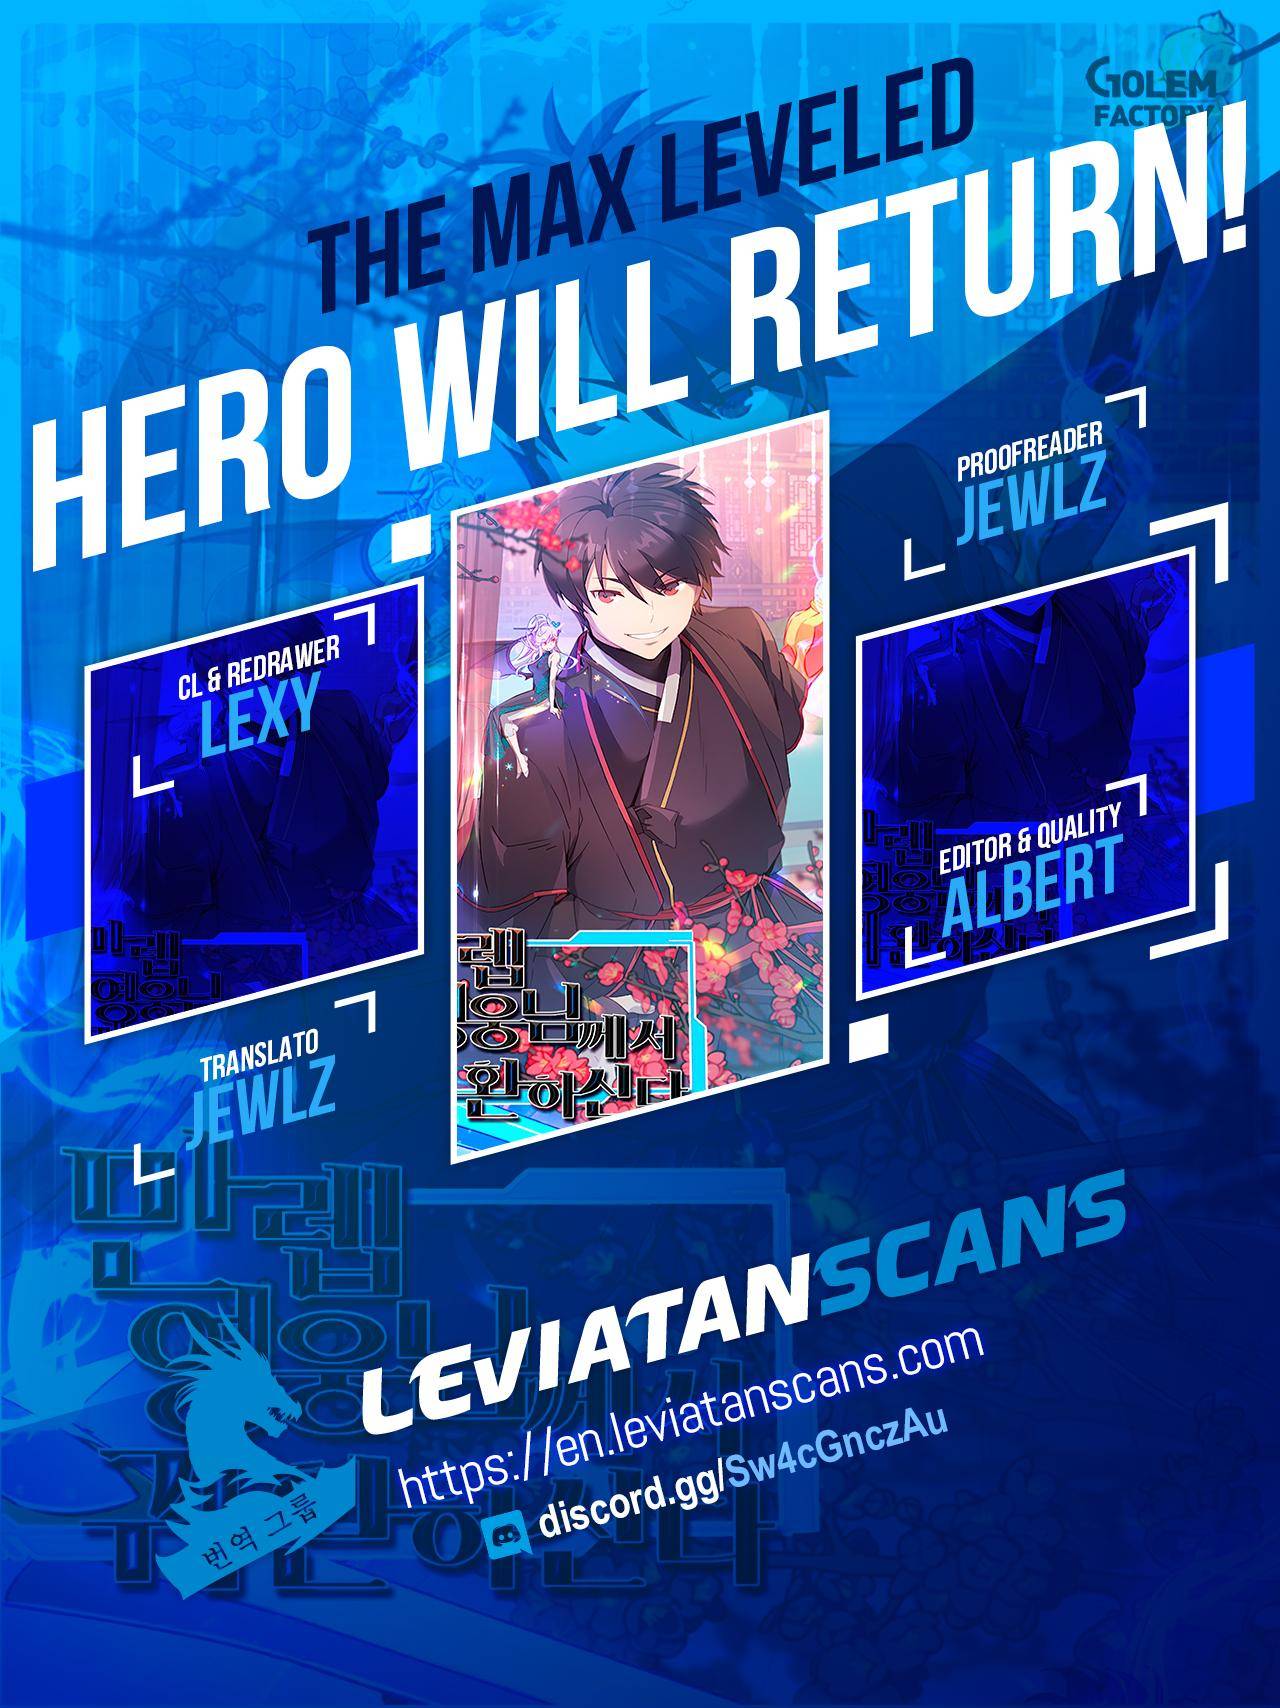 The MAX leveled hero will return! Chapter 126